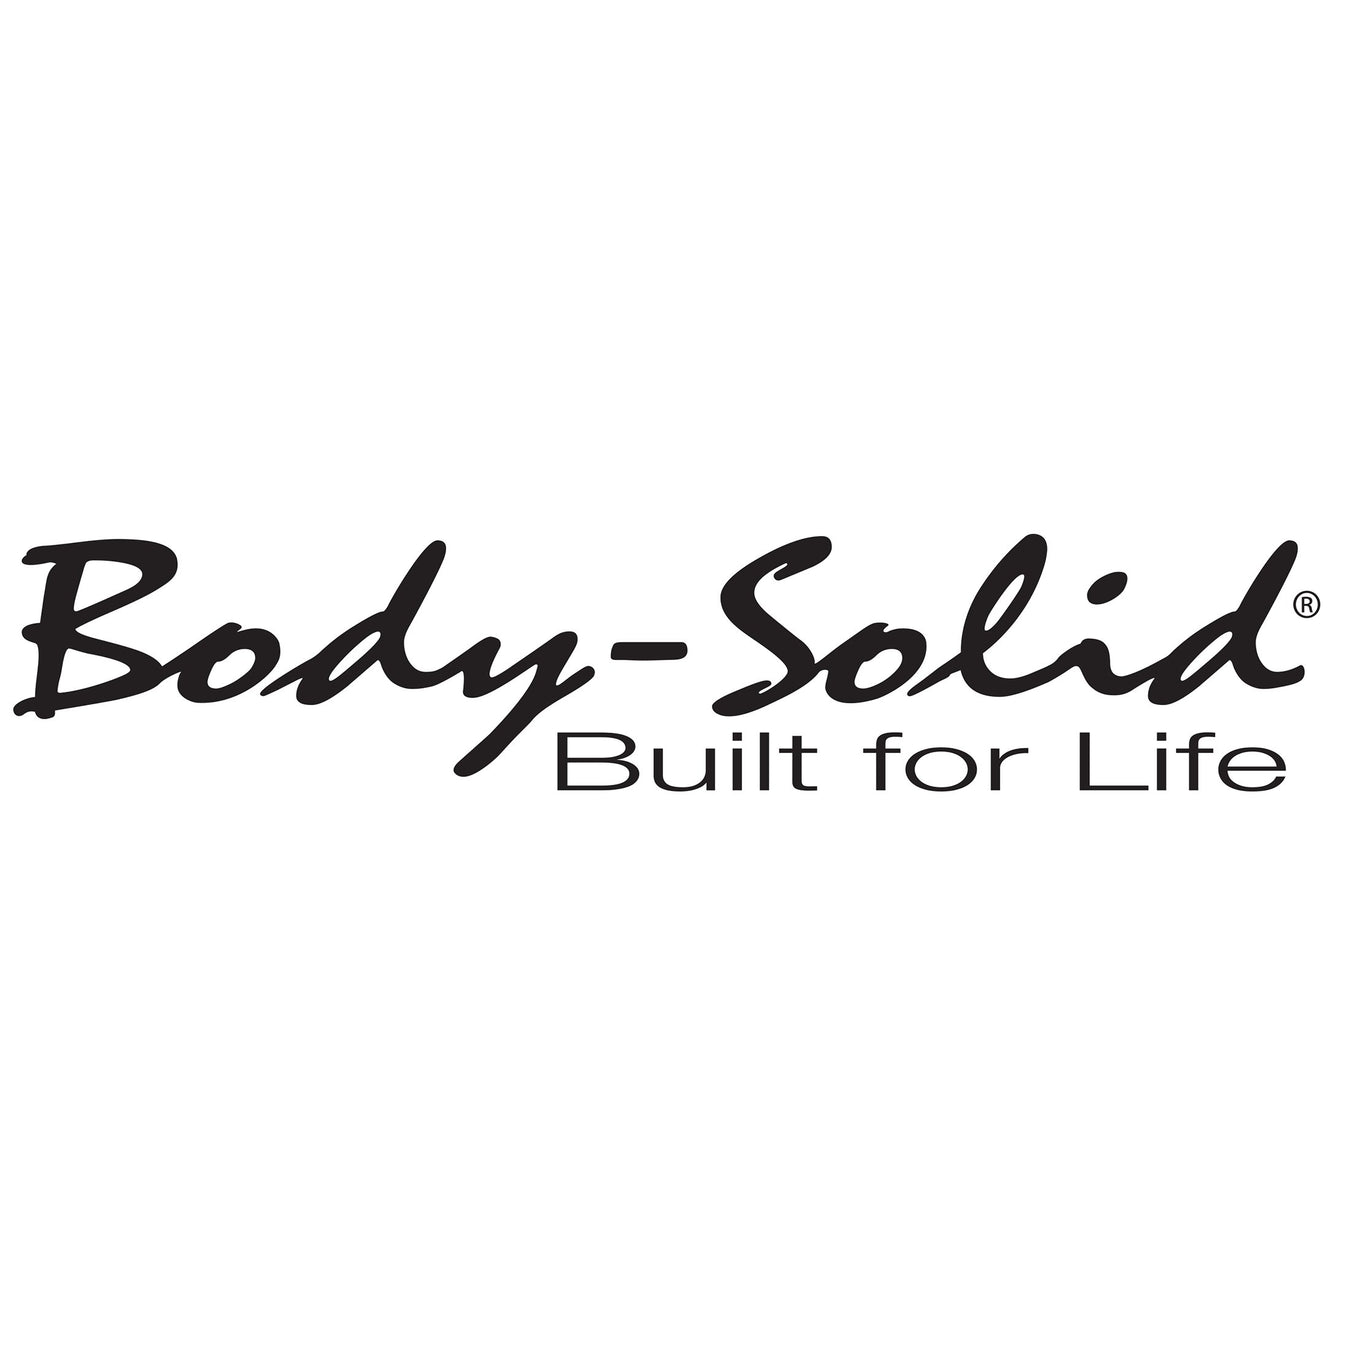 Body Solid